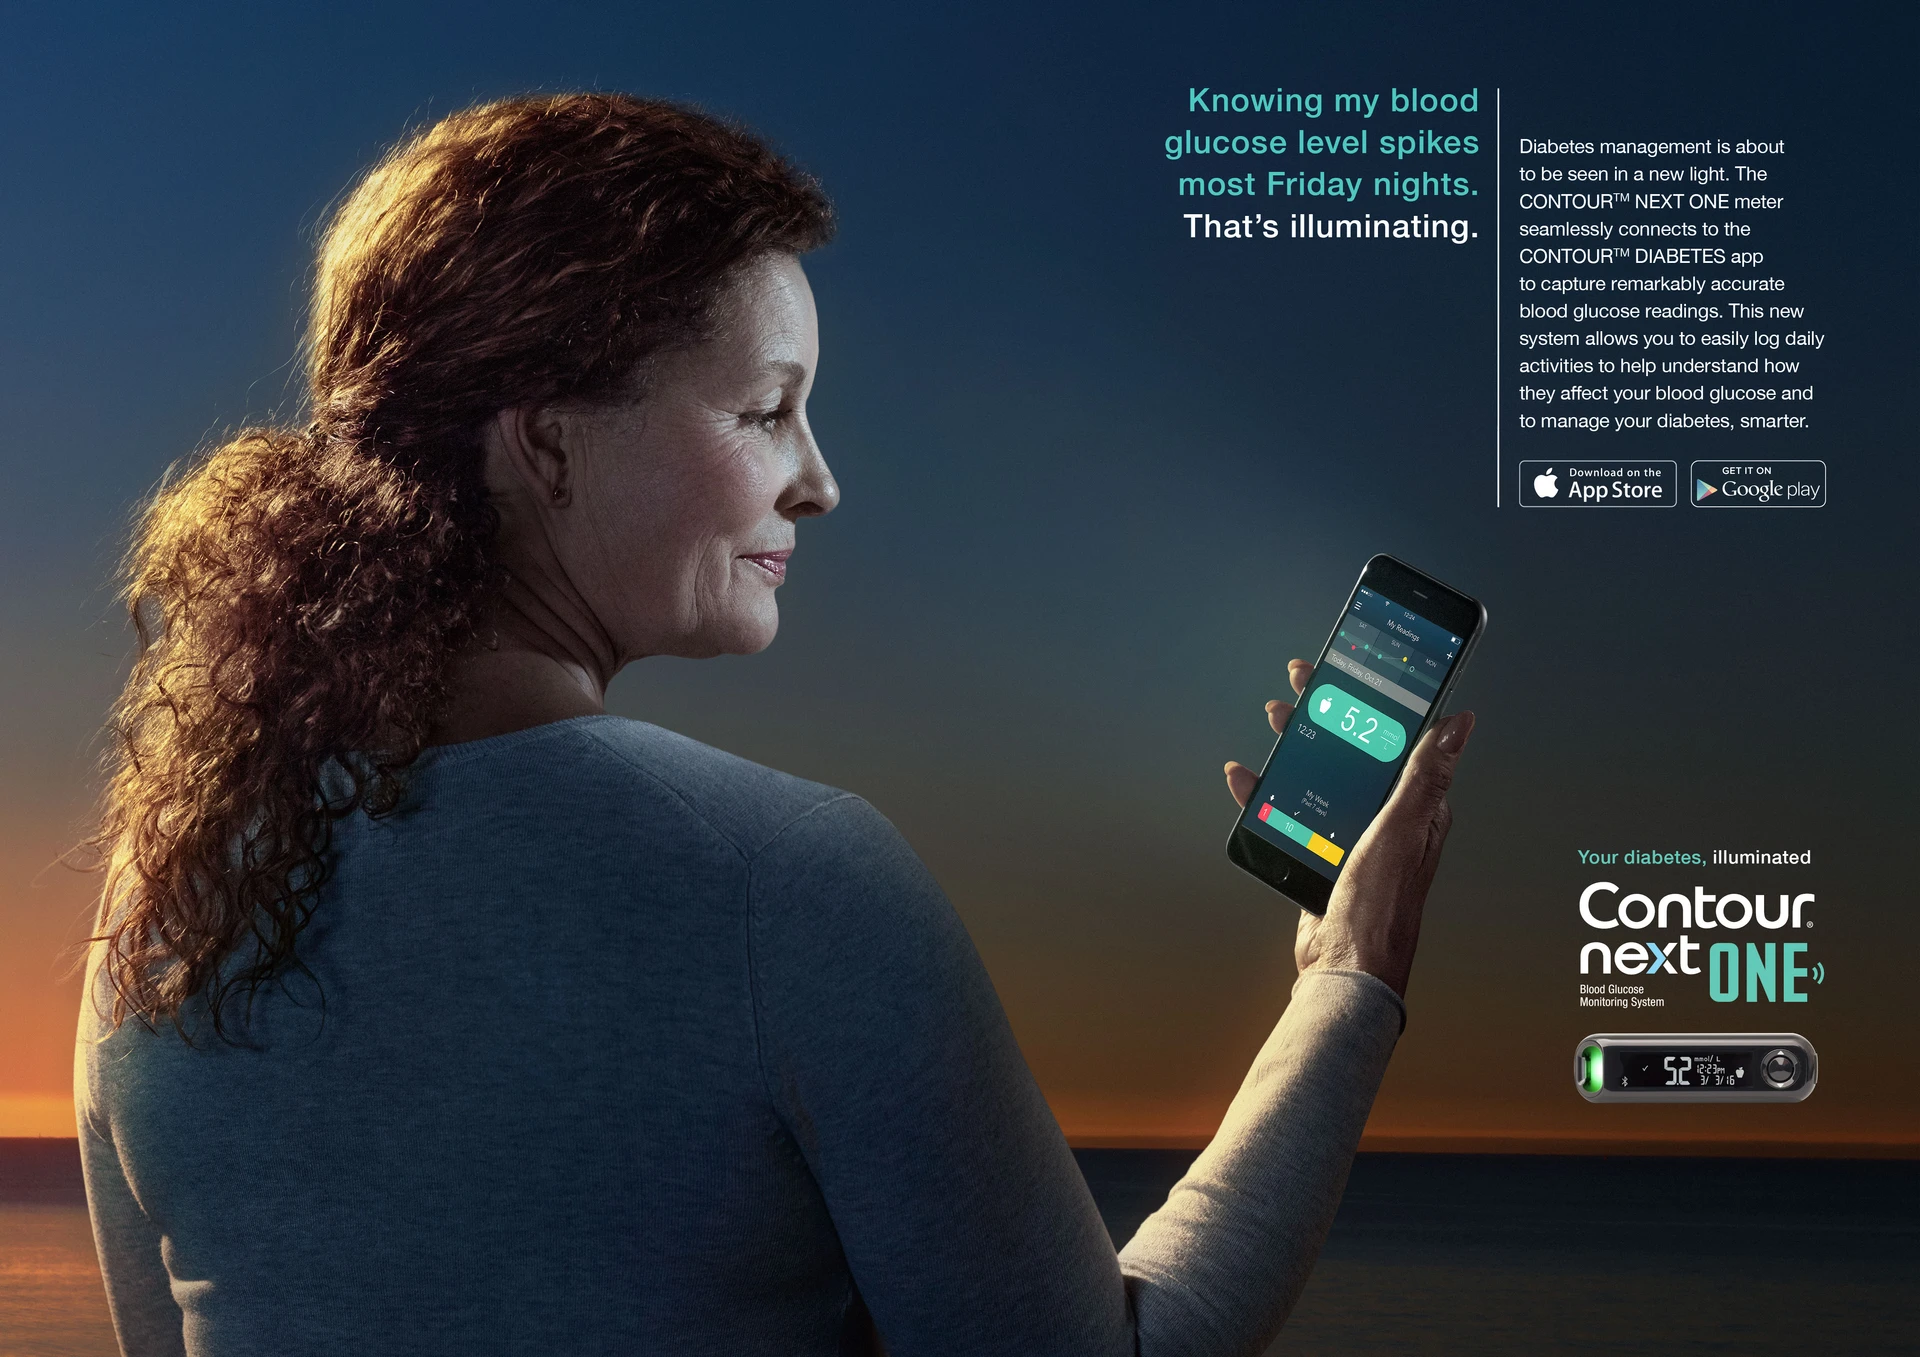 Woman holding phone with diabetes management app interface, against a backdrop of a sunset, accompanied by promotional content for the CONTOUR NEXT ONE meter and app